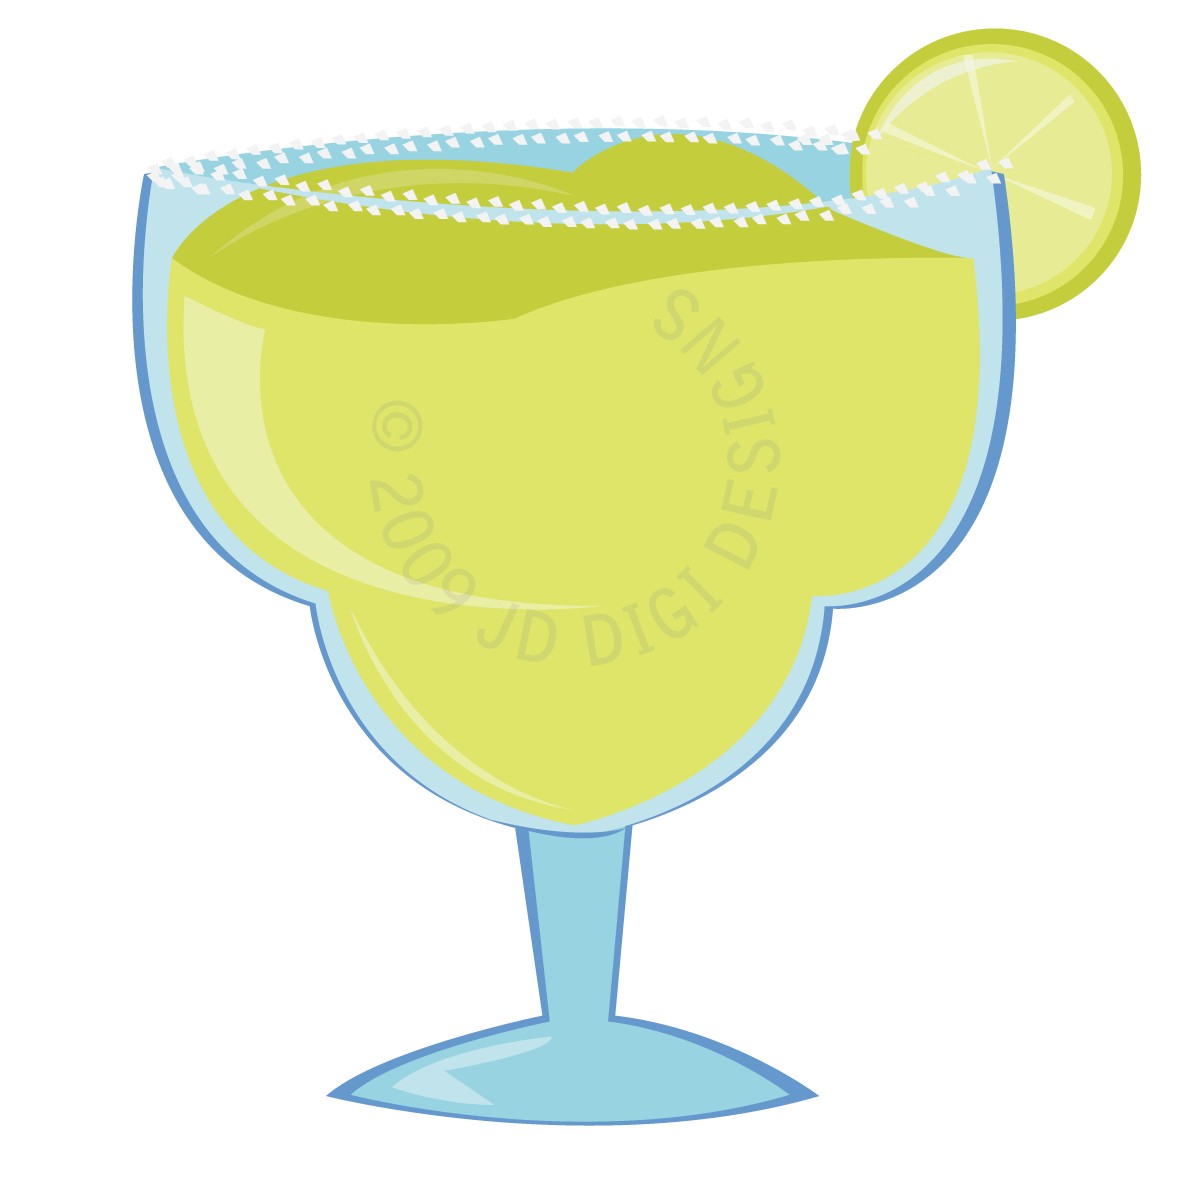 Margarita Glass Clip Art Images   Pictures   Becuo